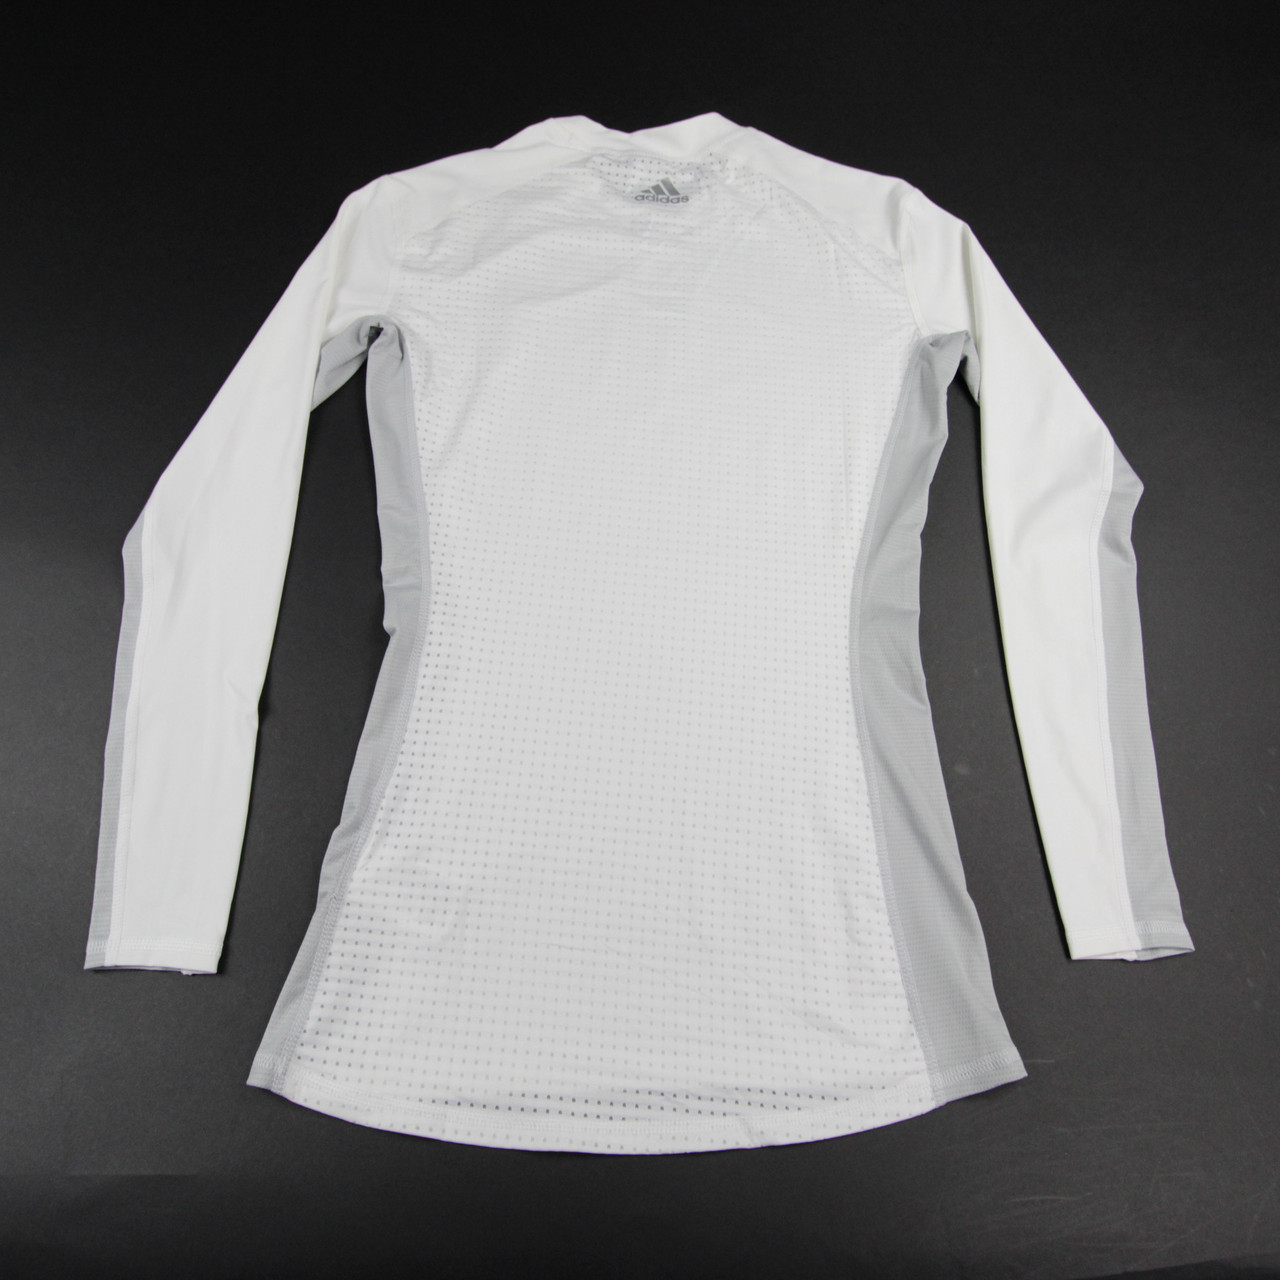 adidas Techfit Compression Top Men's White/Light Gray New without Tags L 86